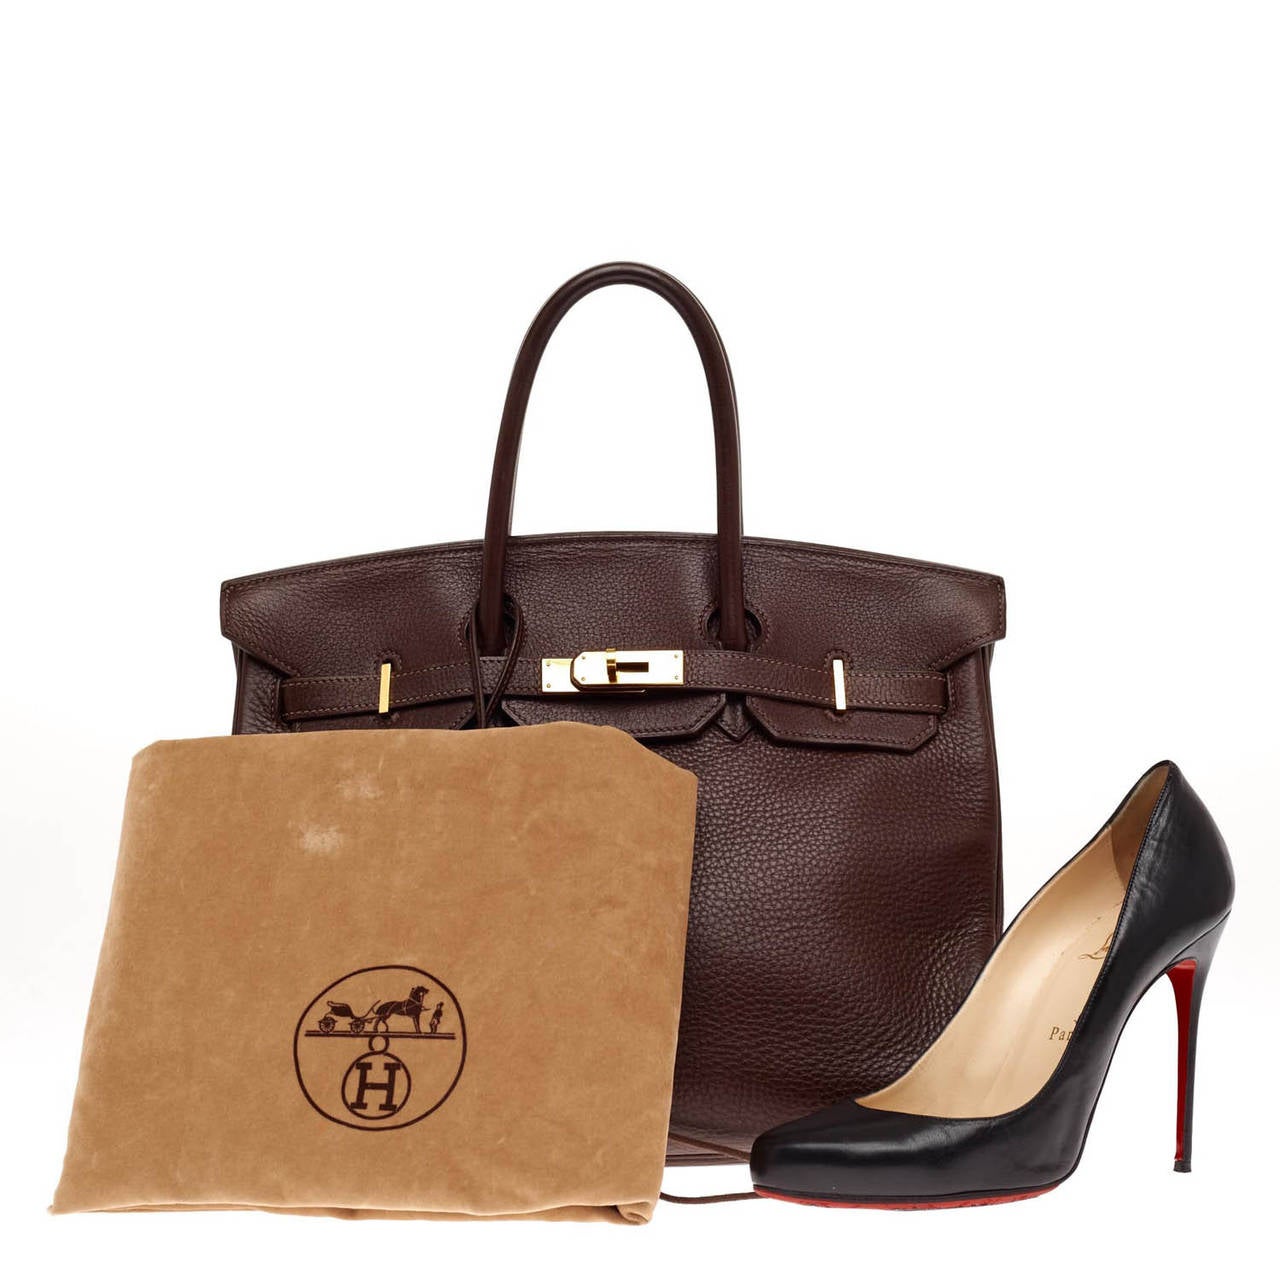 This iconic authentic Hermes Birkin in Chocolate with Gold Hardware in size 35 is the quintessential dream bag for the modern woman. Crafted in luxurious Clemence leather features dual-rolled top handles, frontal flap, polished gold turn lock